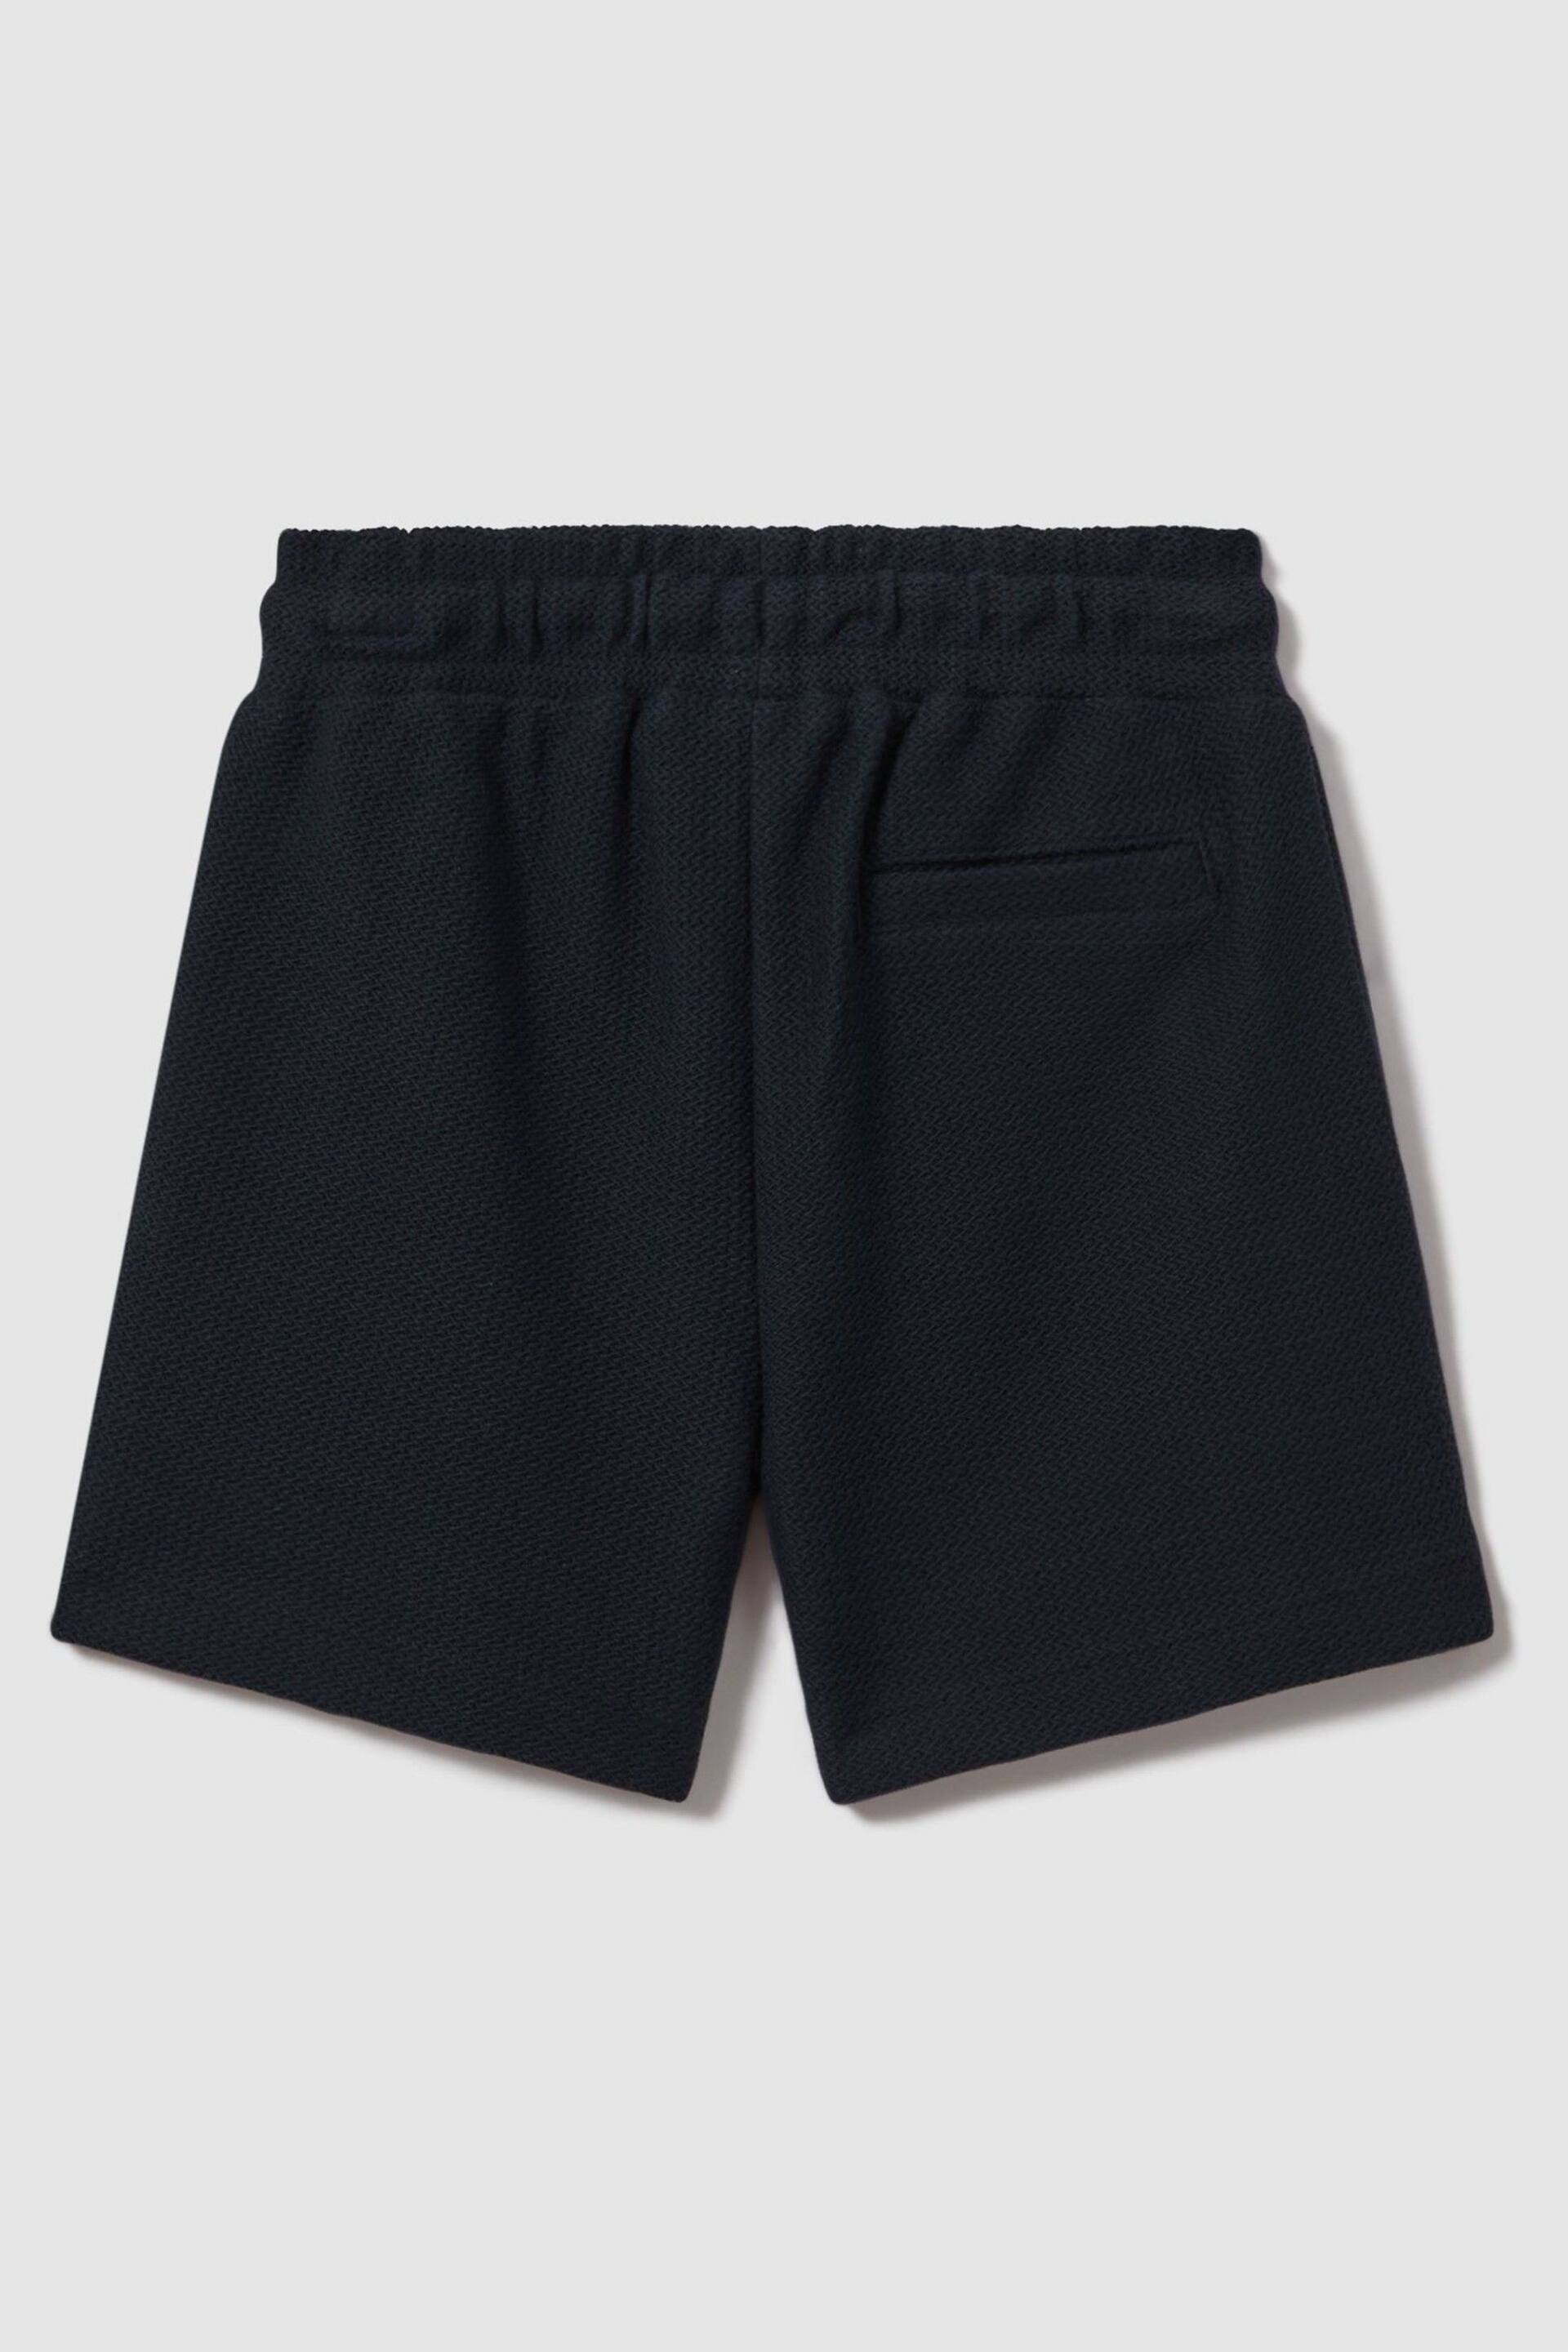 Reiss Navy Hester Teen Textured Cotton Drawstring Shorts - Image 2 of 3